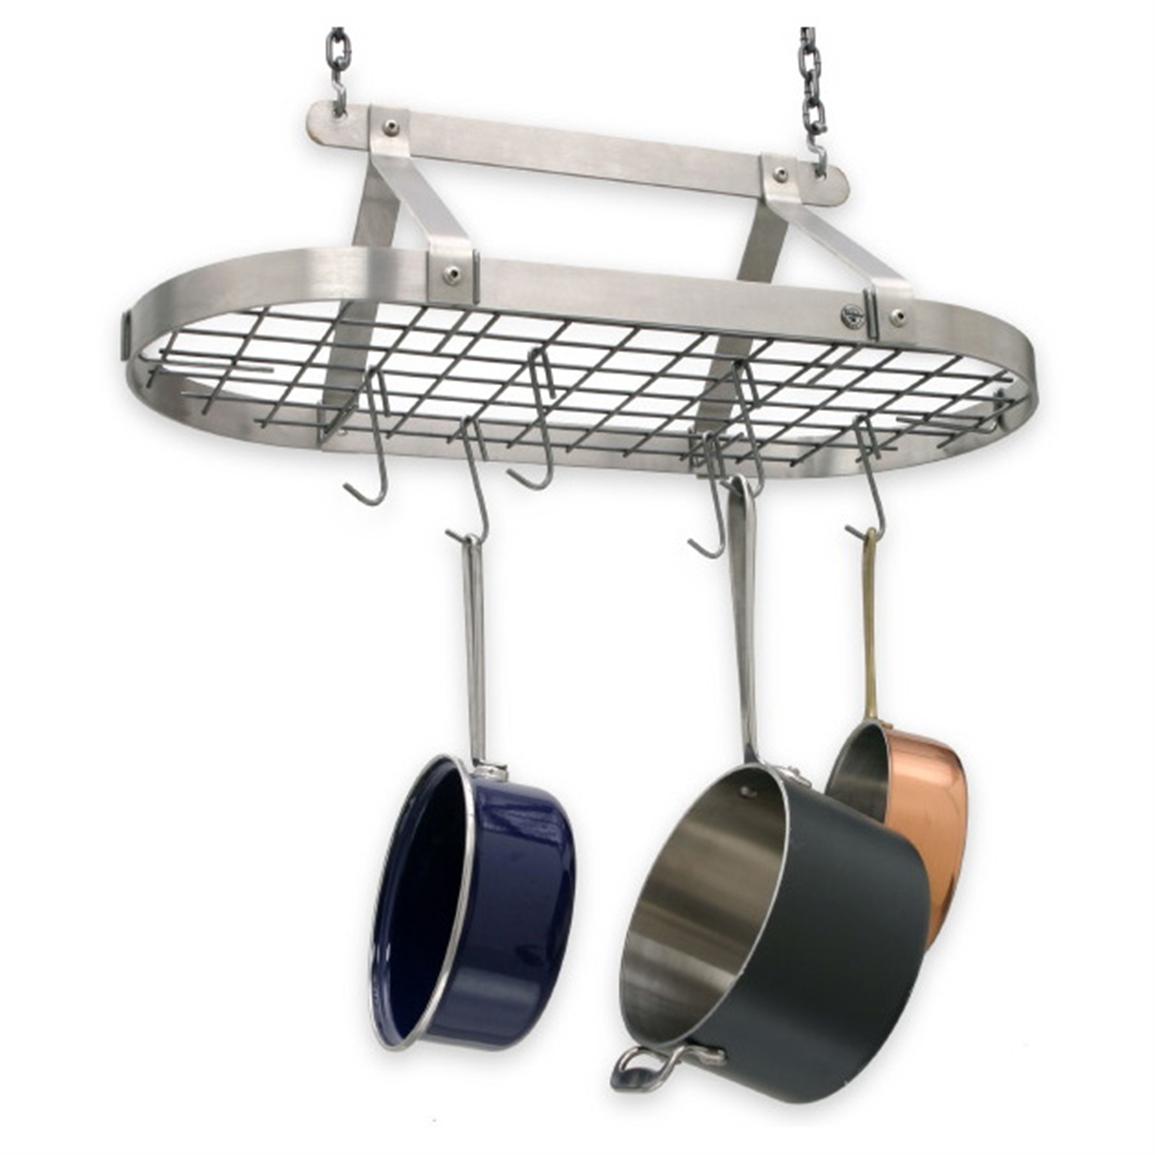 Enclume® Decor Classic Stainless Steel Hanging Pot Rack - 226506 Enclume Stainless Steel Pot Rack